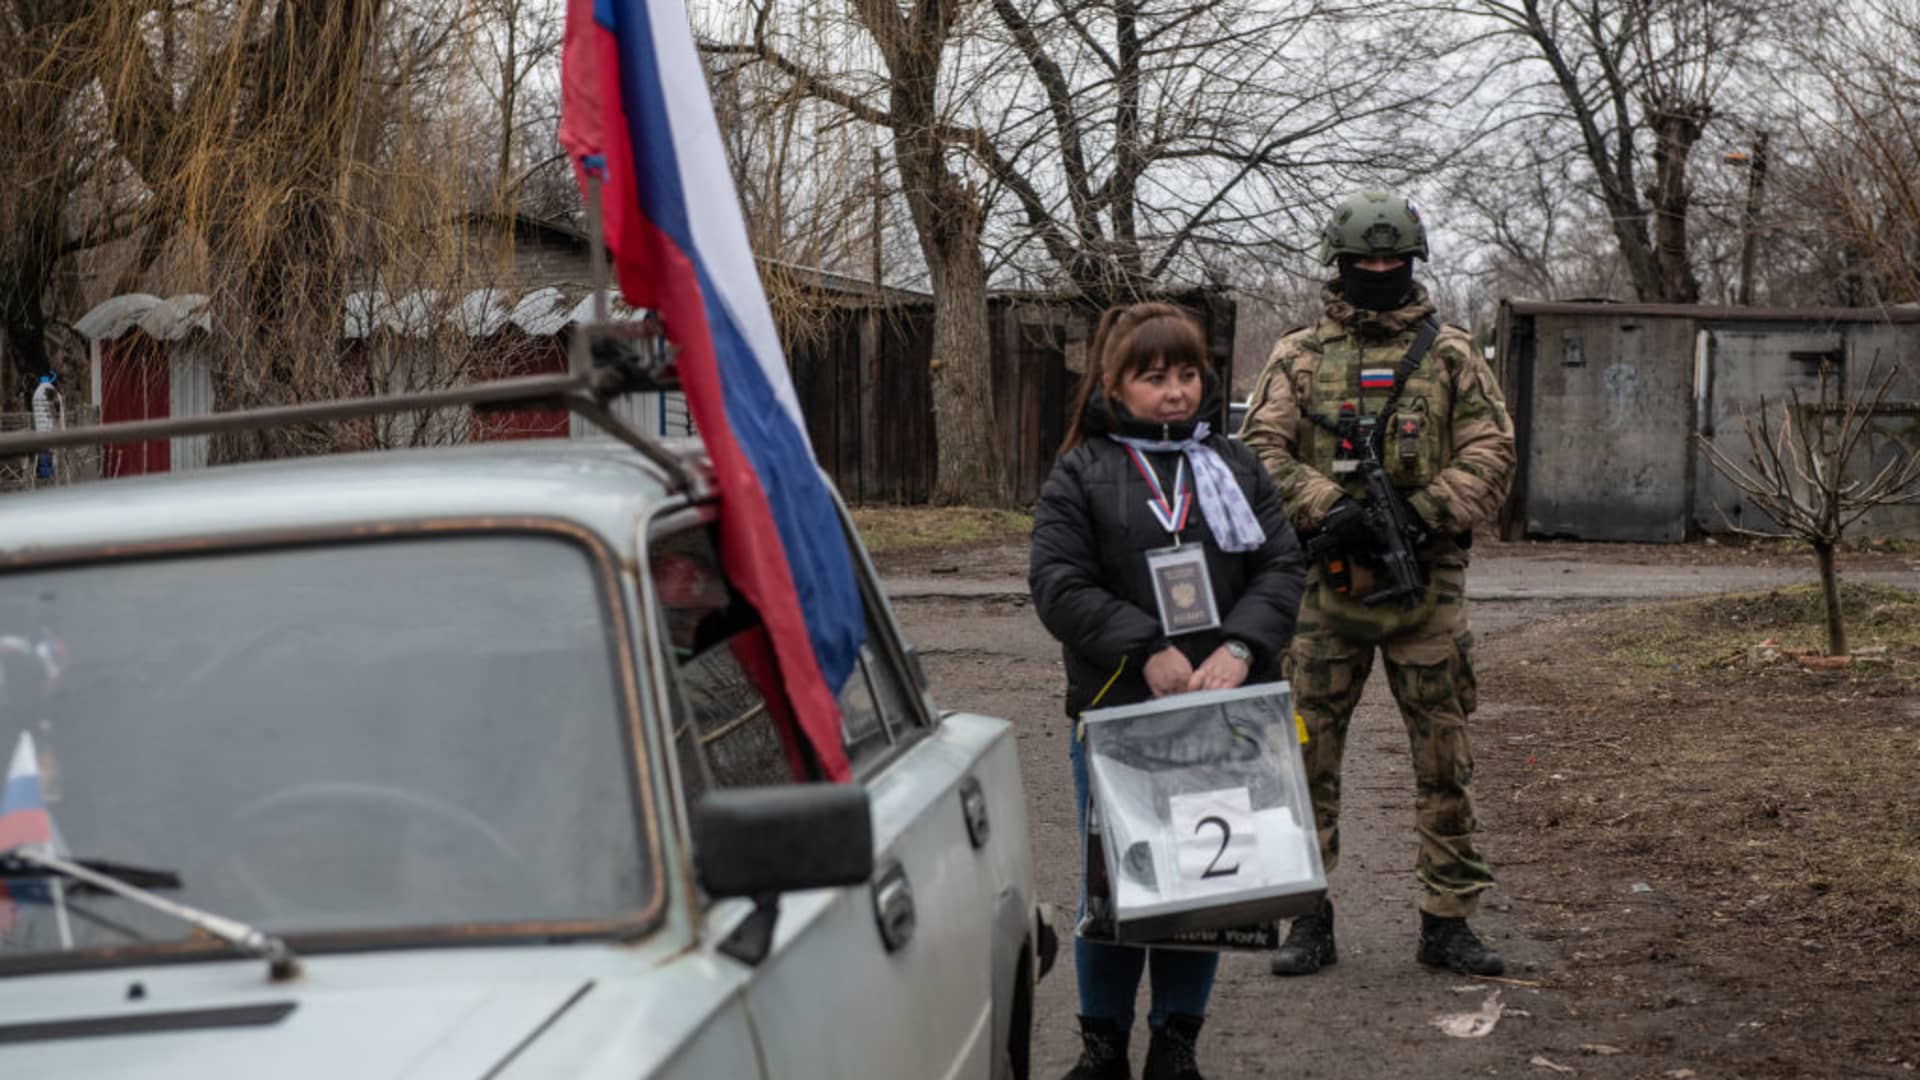 A member of a local election commission, accompanied by a serviceman, visits voters during early voting in Russia's presidential election in Donetsk, Russian-controlled Ukraine, amid the Russia-Ukraine conflict on March 14, 2024.